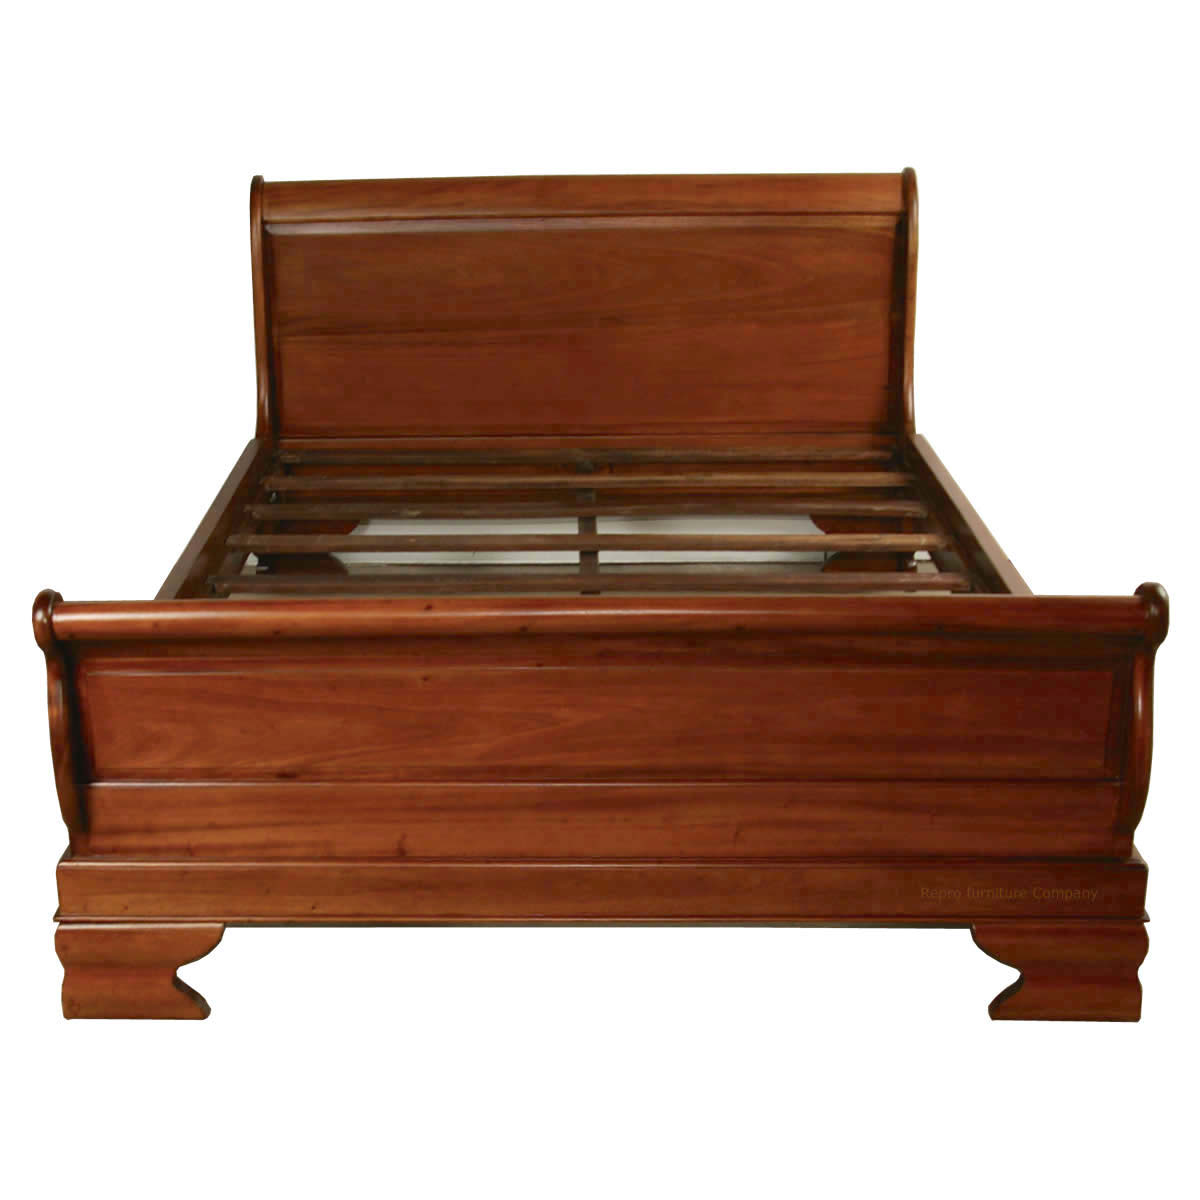 King Size Mahogany Sleigh Bed Repro, King Size Mahogany Sleigh Bed